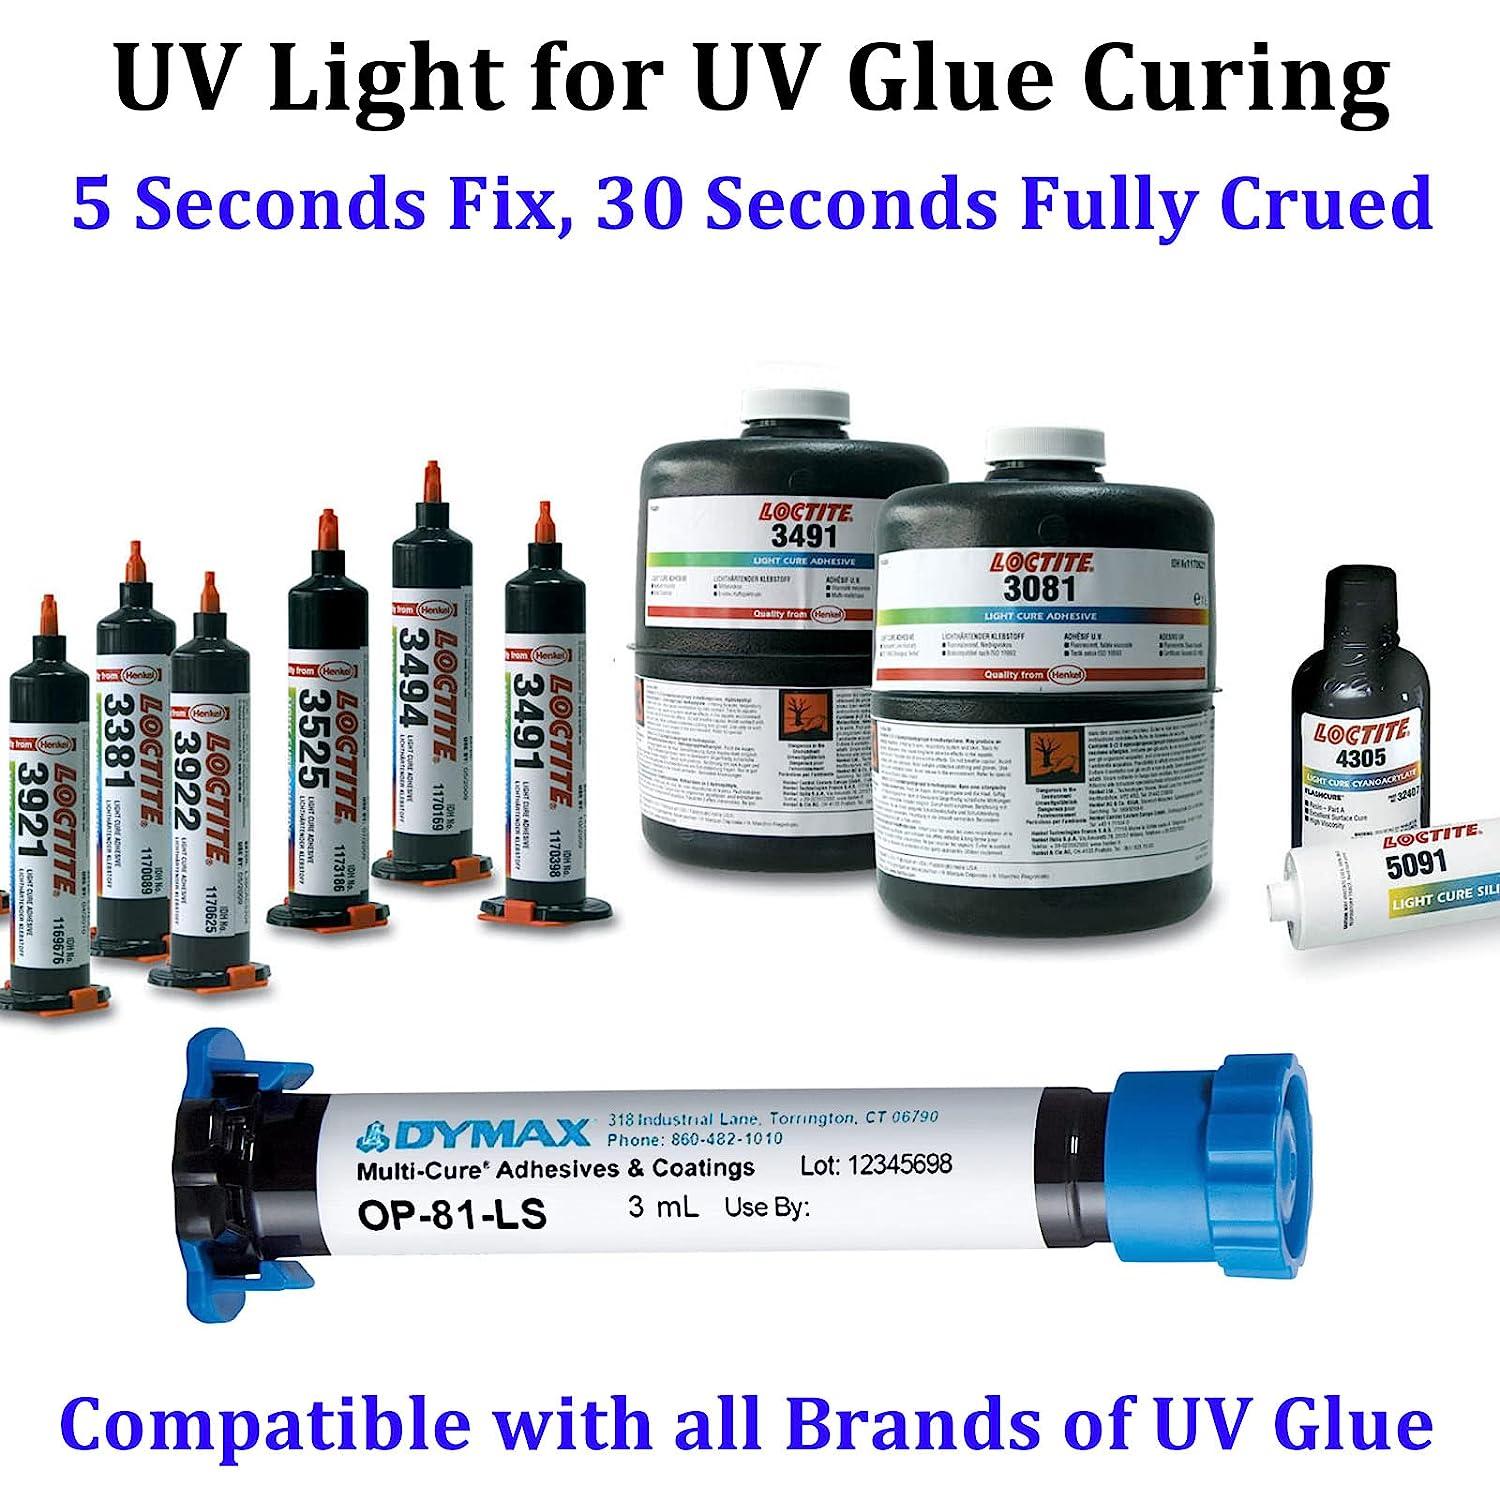 I0DO Light for Nails/Resin/Glue,Uv Gel Nail Lamp,Nail Dryer UV Lamp for Gel Nails Fast Curing 6W USB 5V with Timer